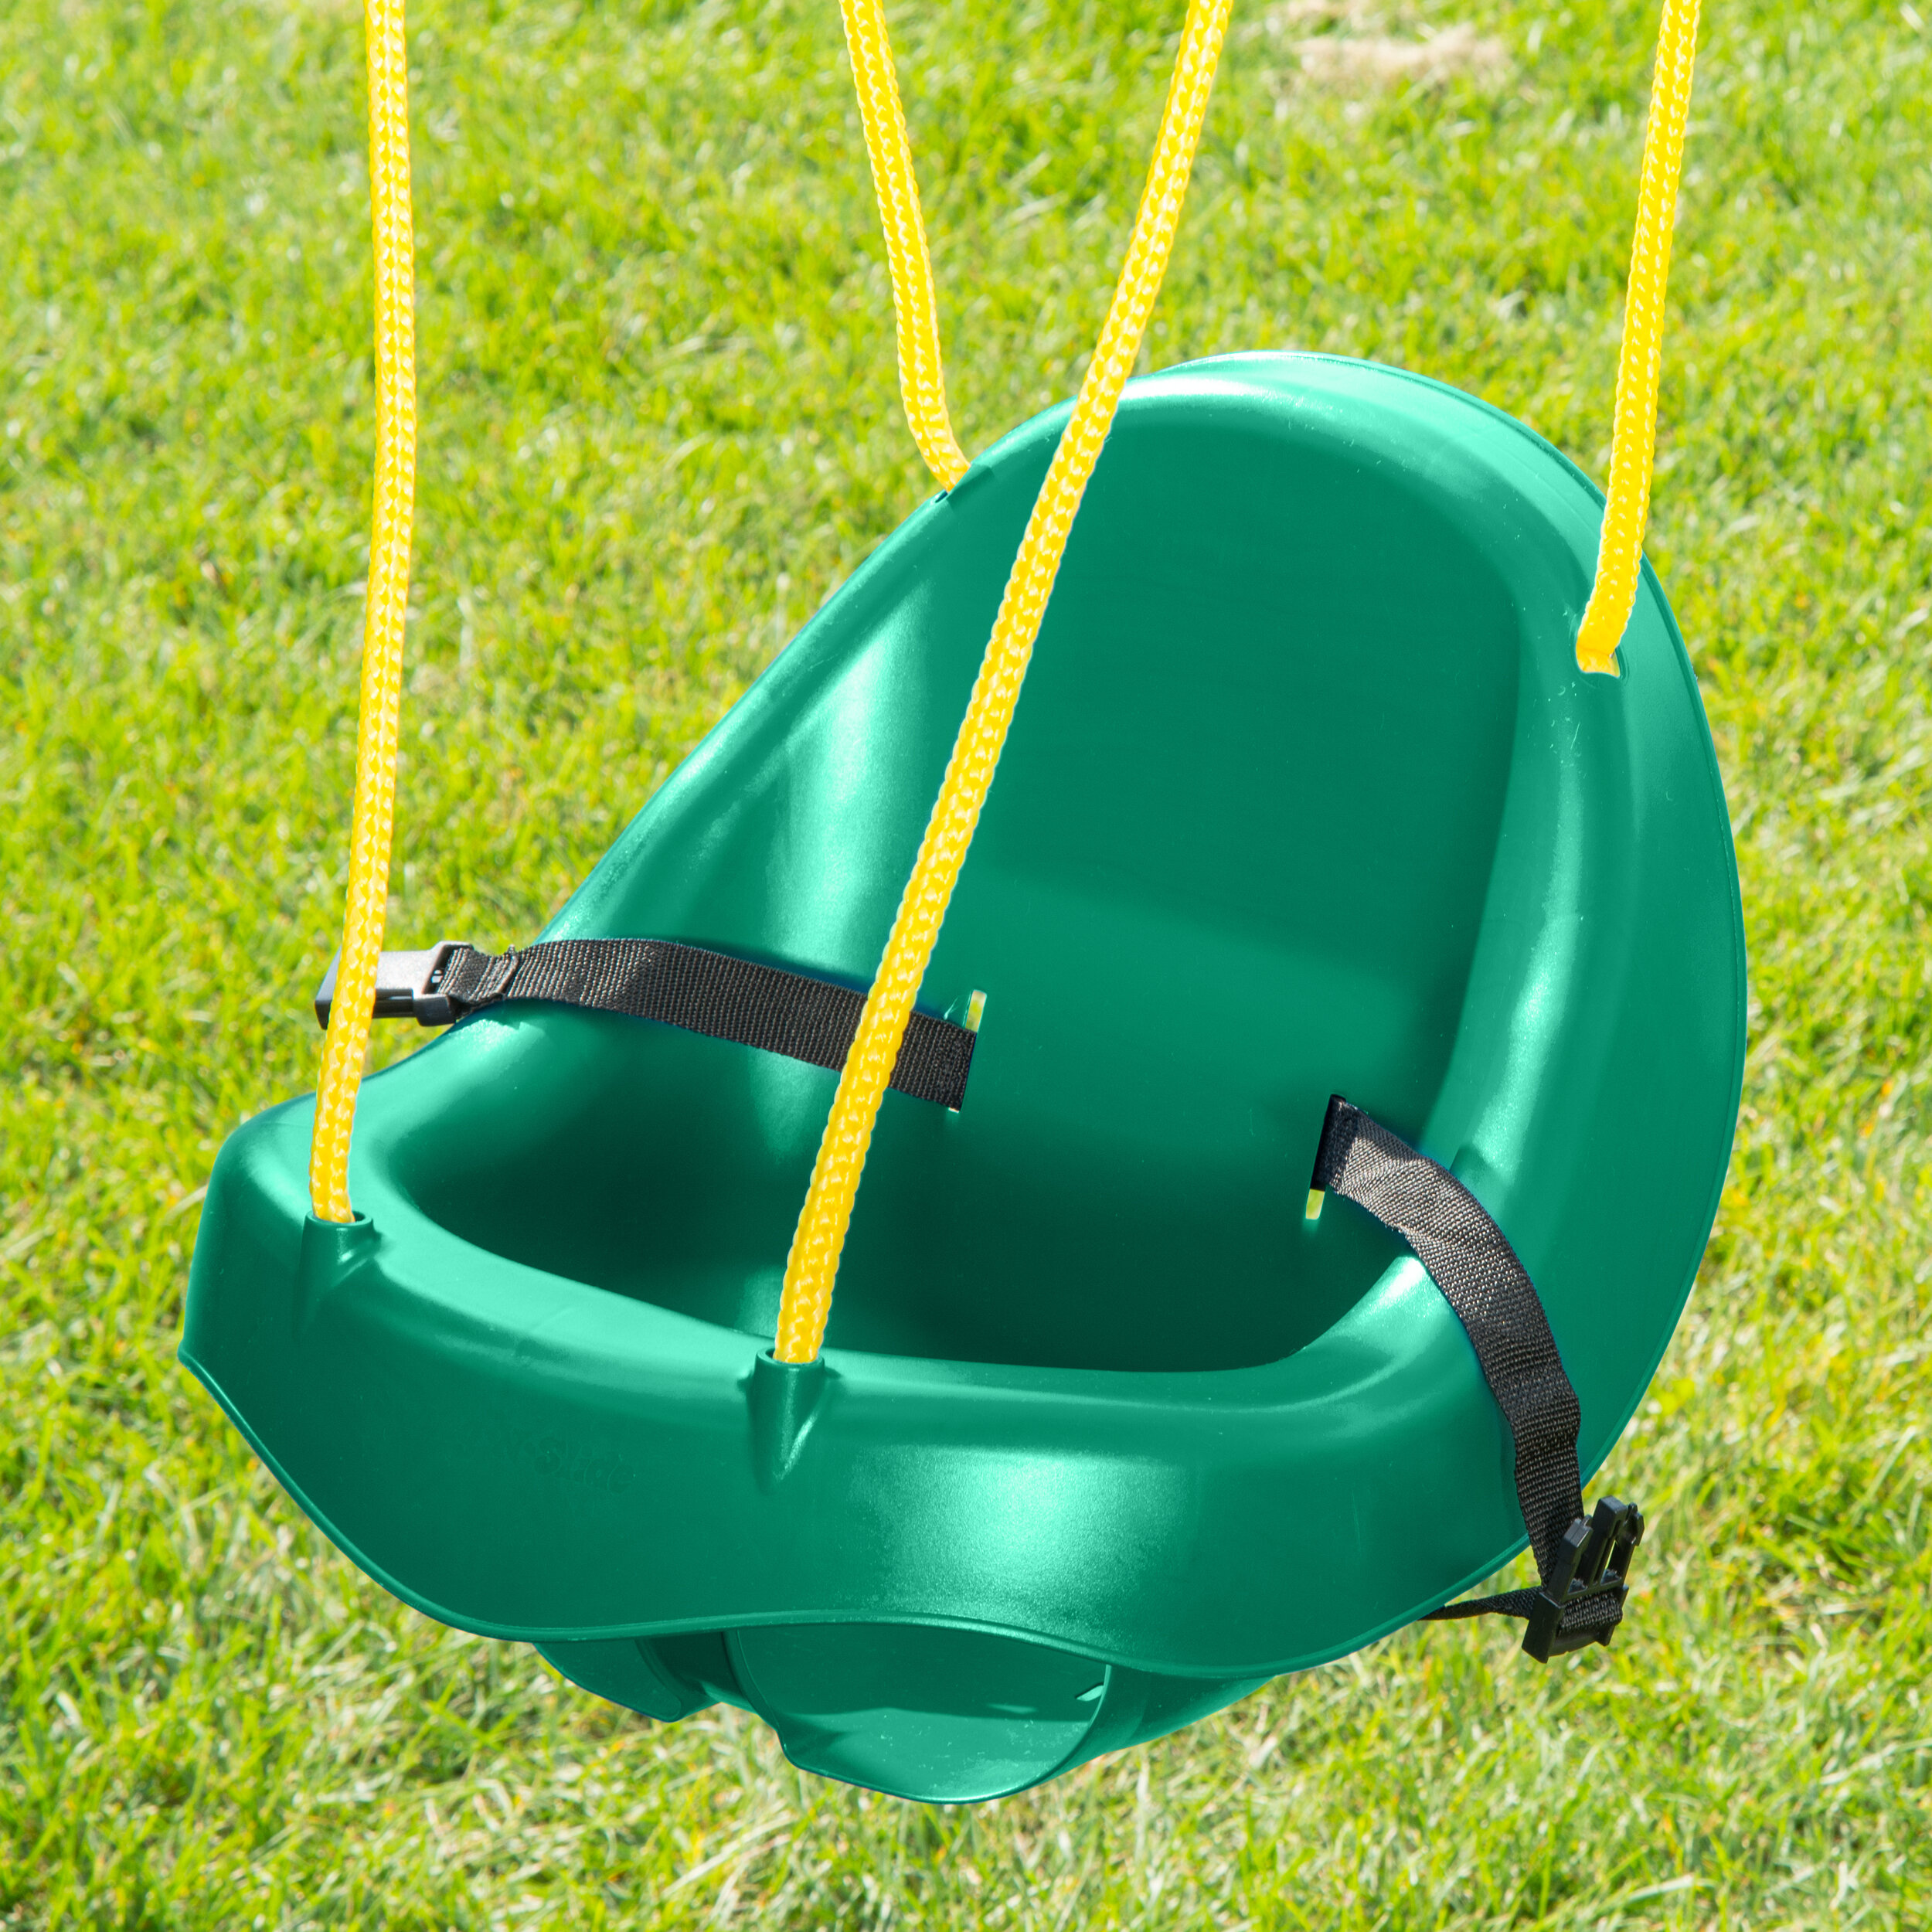 Swing-n-Slide Child Swing Seat with 